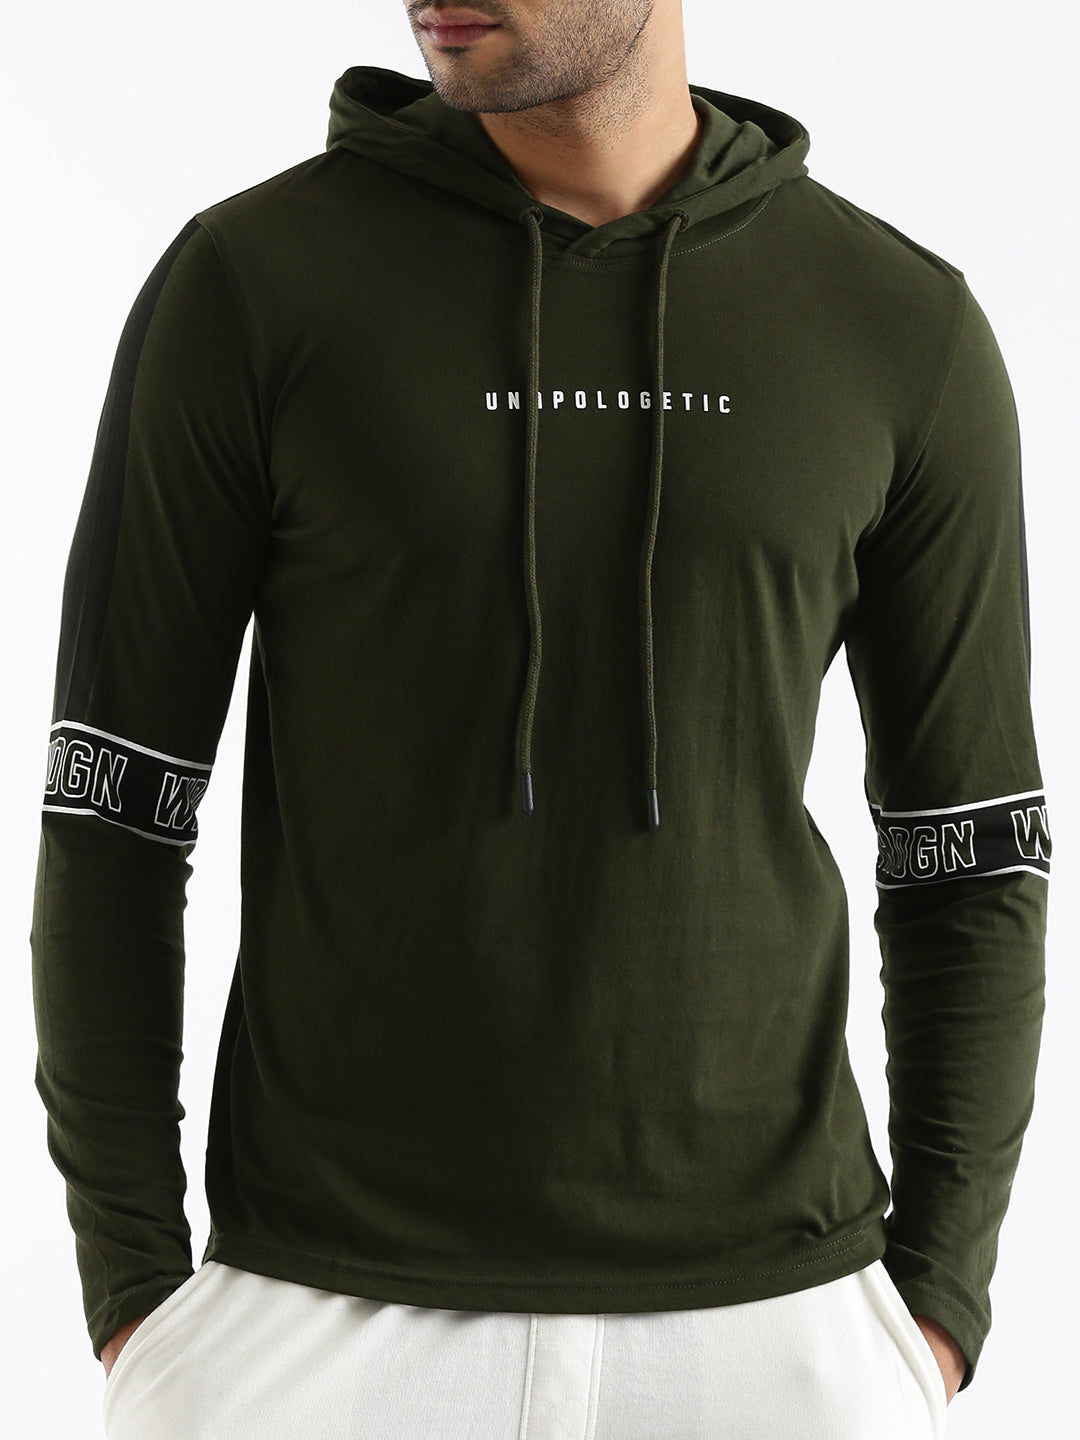 Unapologetic Print Hooded T-Shirt